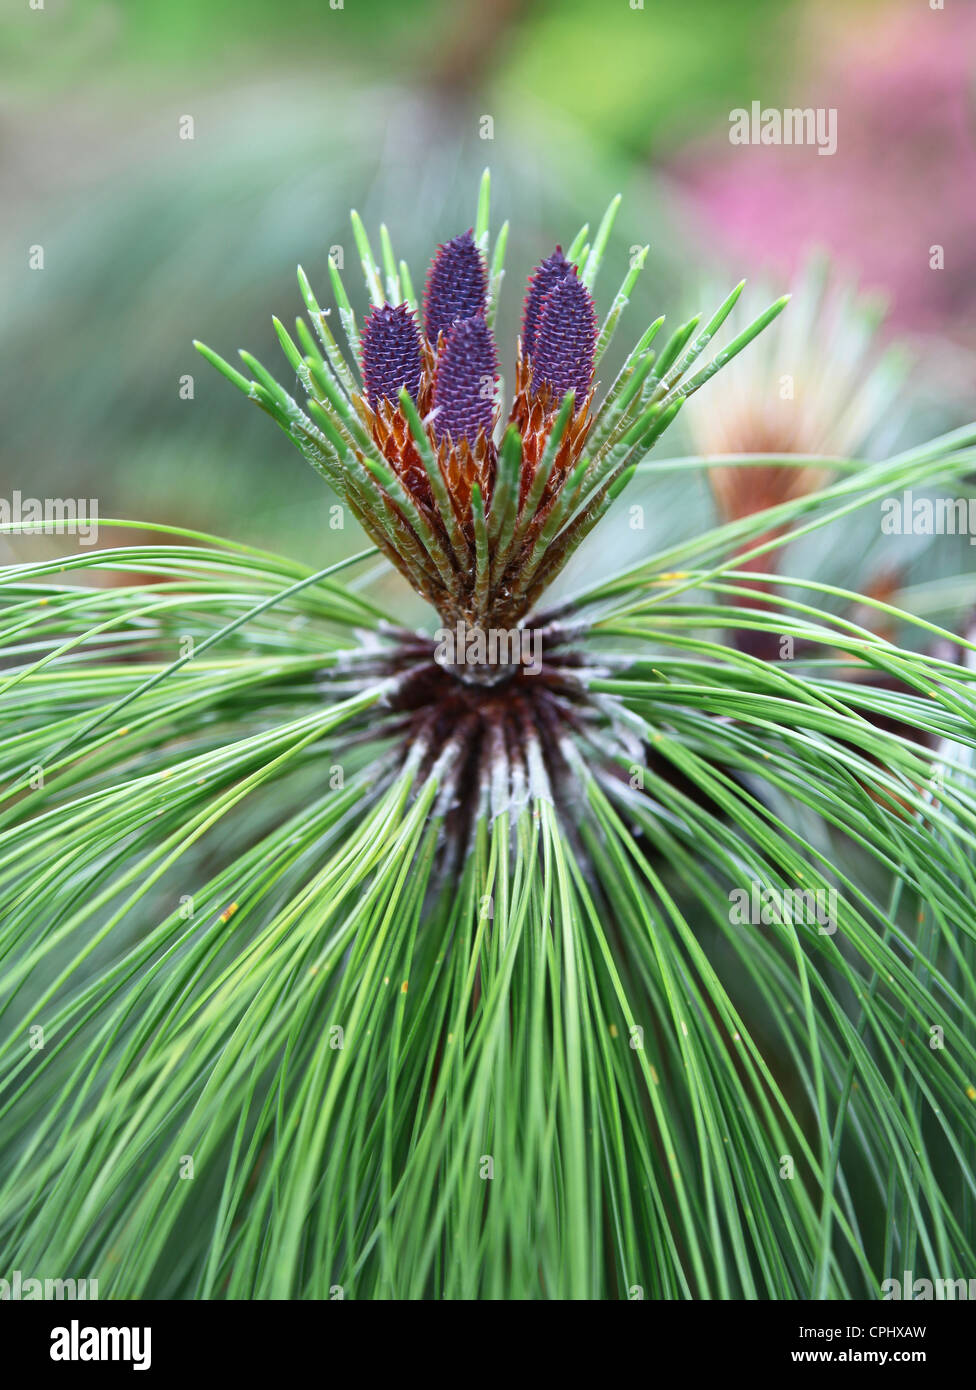 Purple cones of Pinus montezumae, known as the Montezuma Pine, is a species of conifer in the Pinaceae family Stock Photo